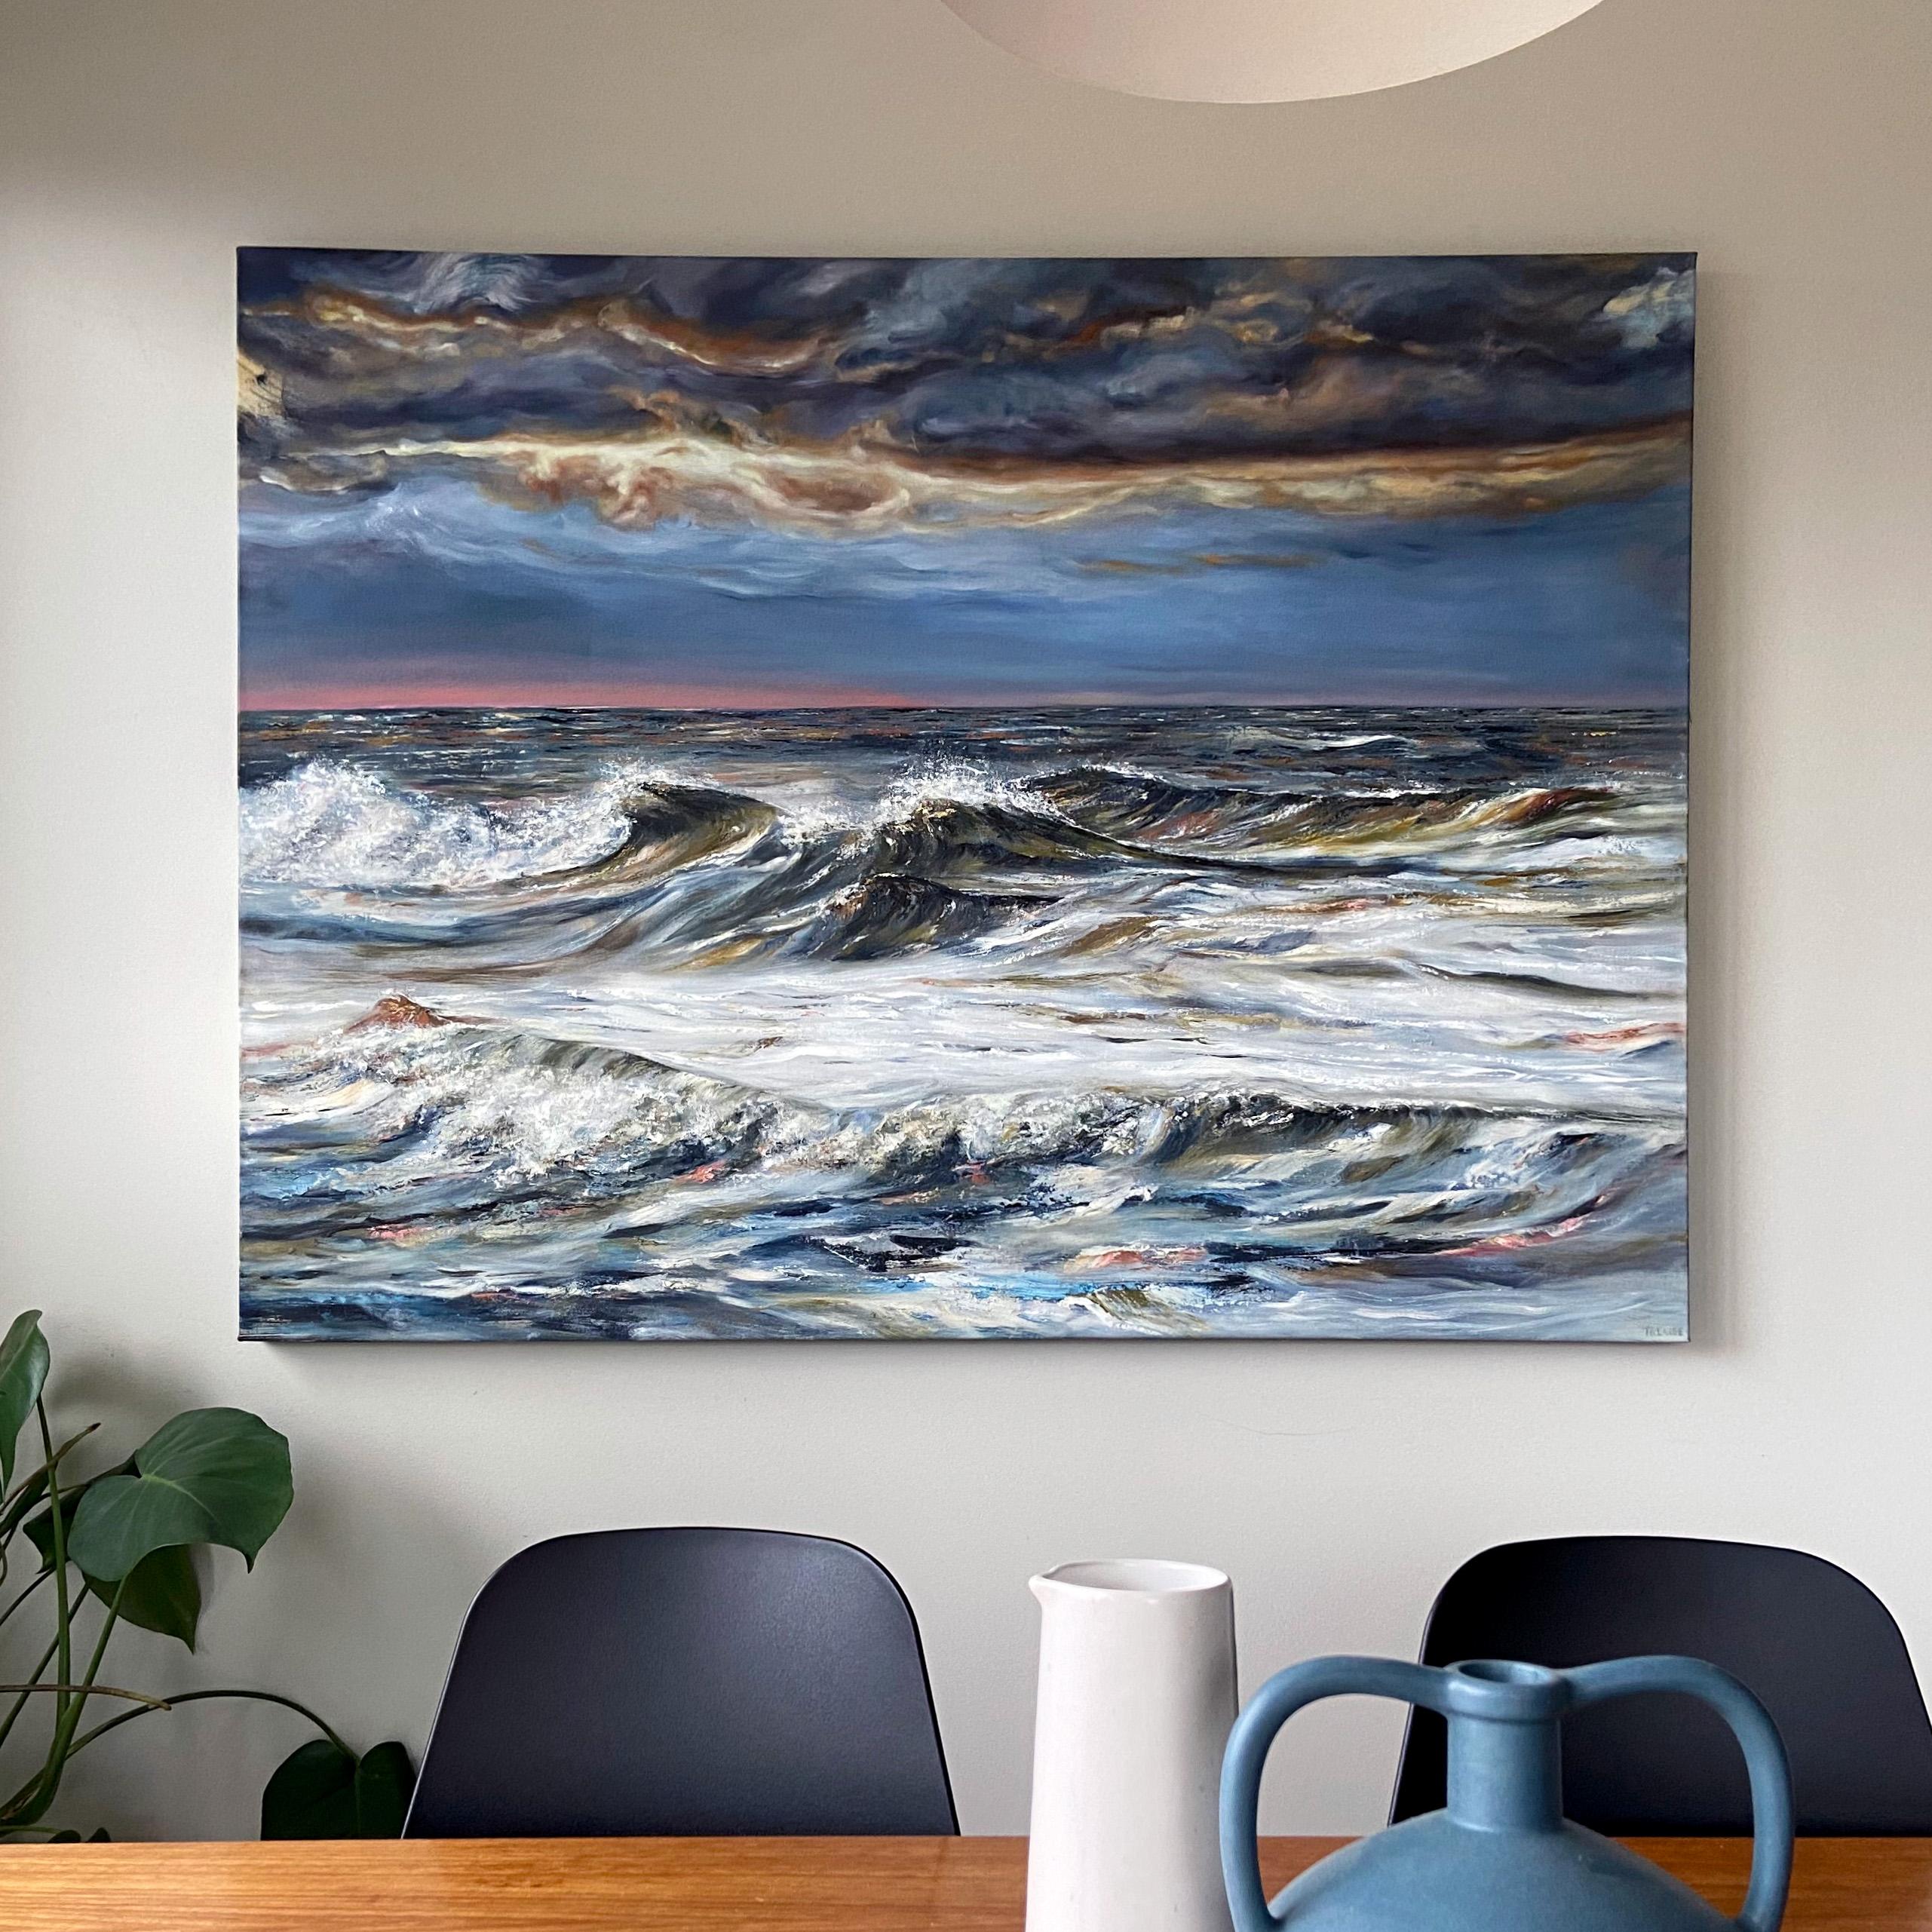 <p>Artist Comments<br>This mixed-media painting captures a stormy seascape with energetic waves and a dramatic sky. The blend of oil paint, ink, and cold wax creates a textured surface, adding depth to the composition. The combination of various